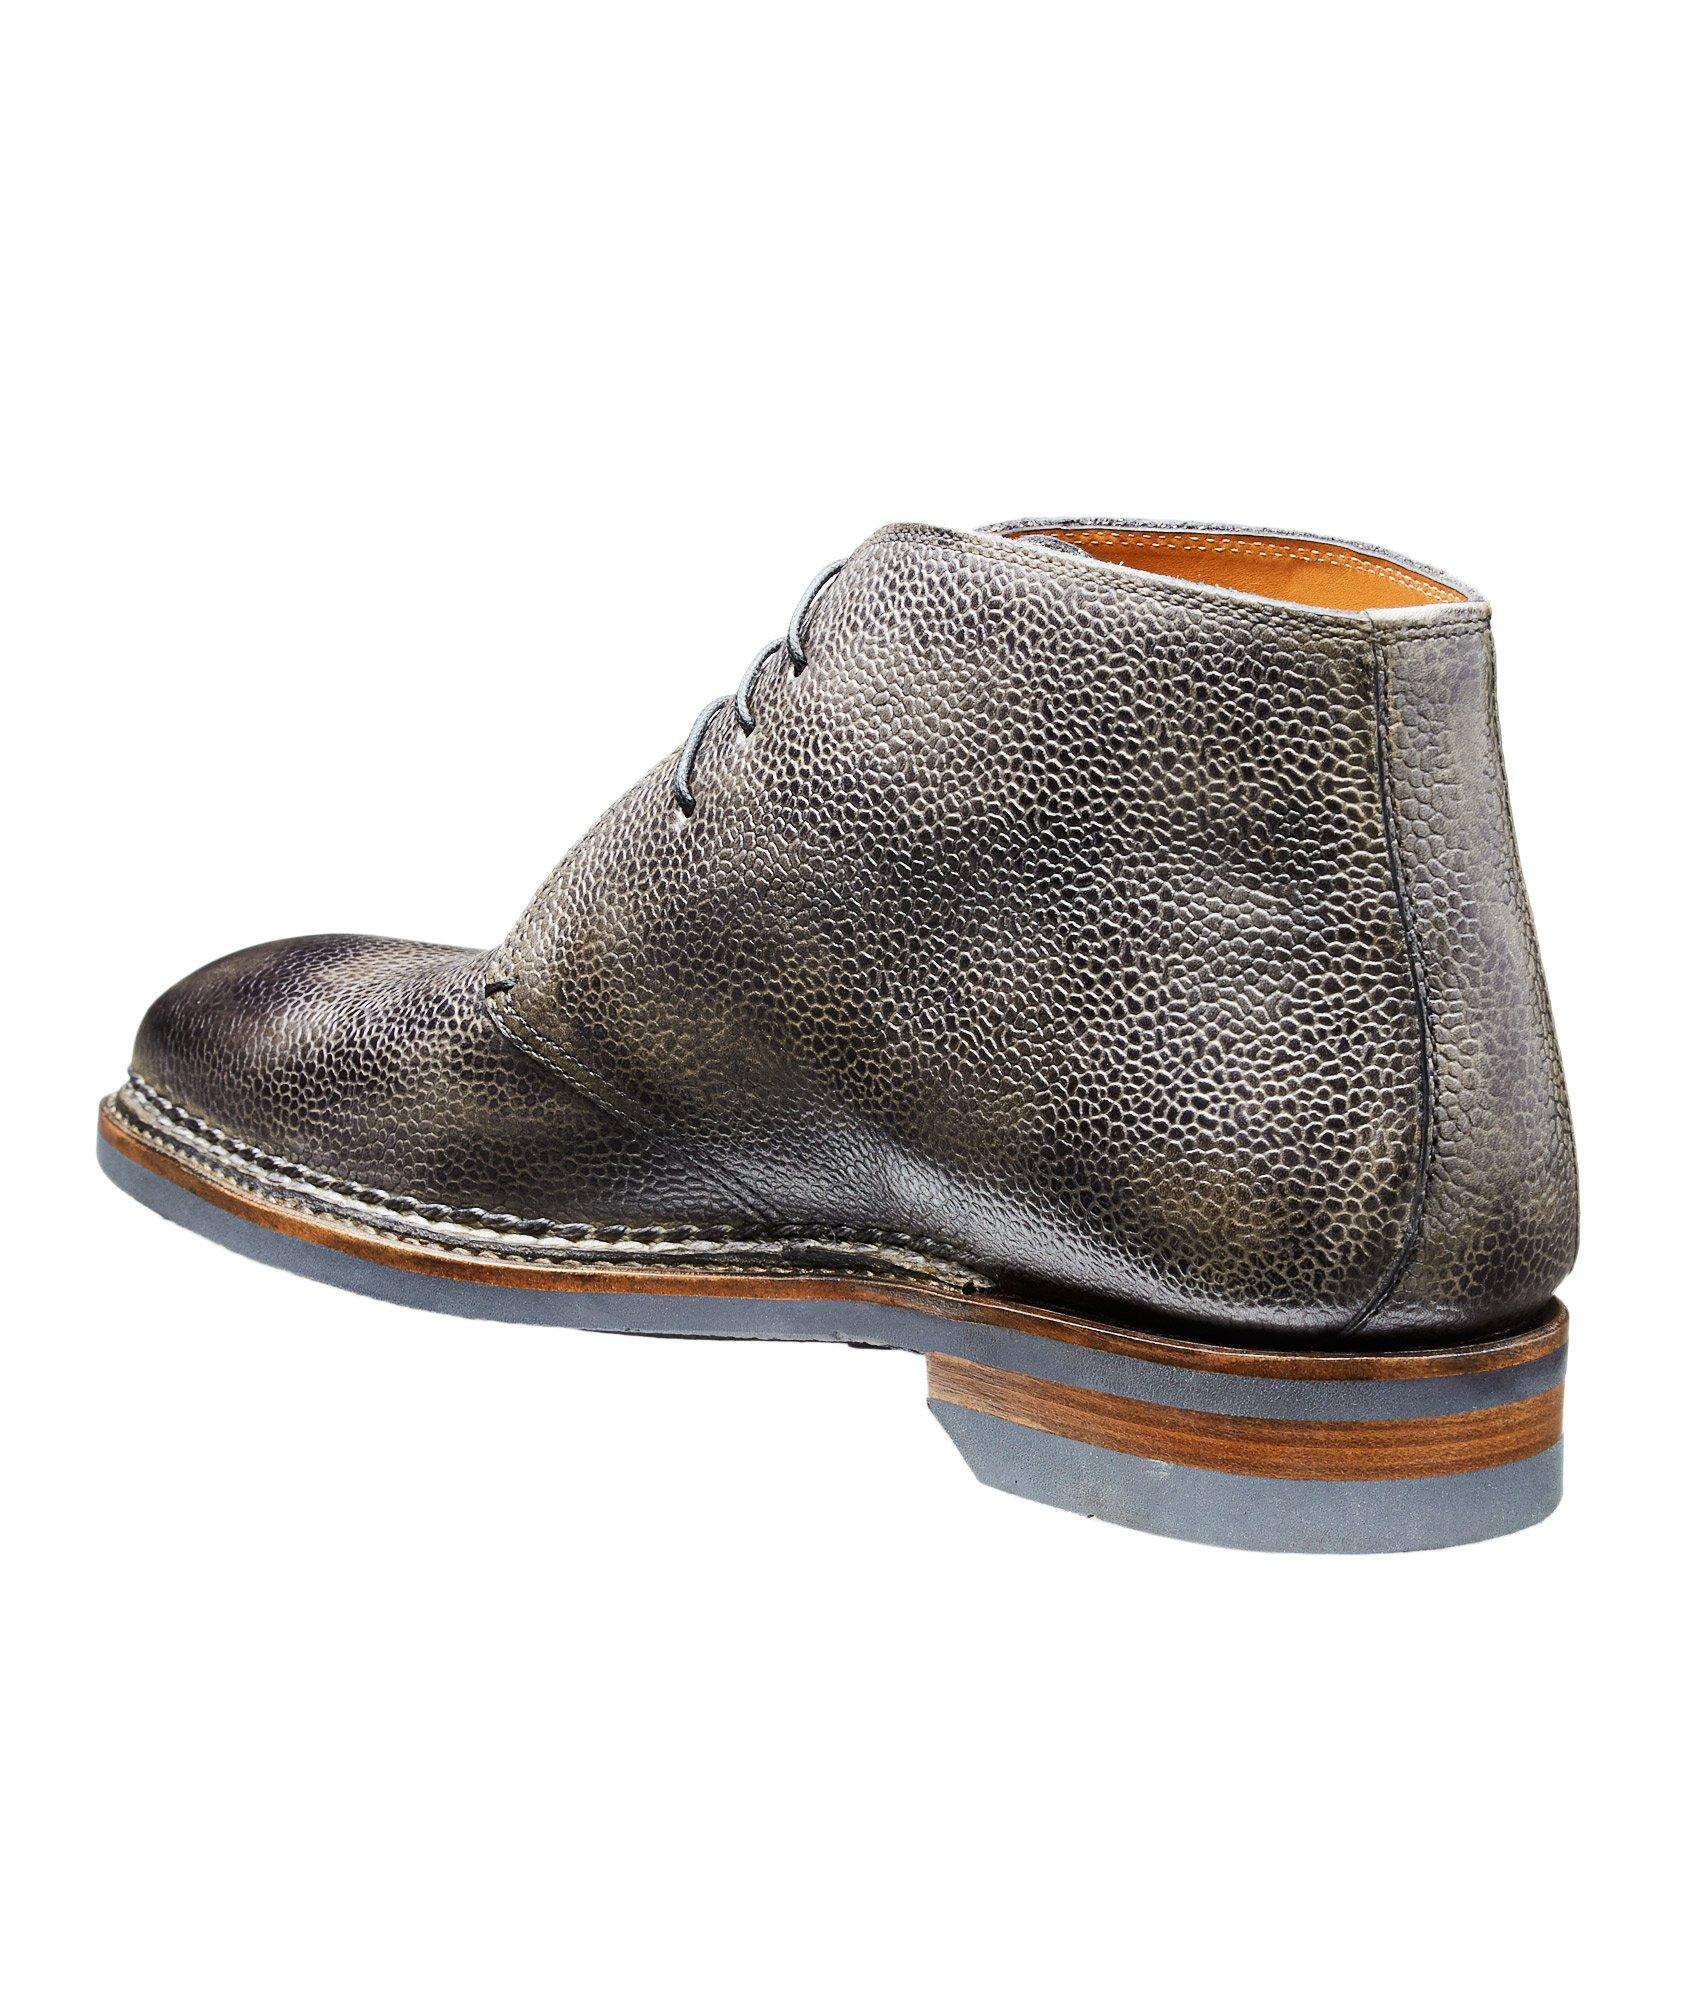 Pebbled Leather Desert Boots image 1